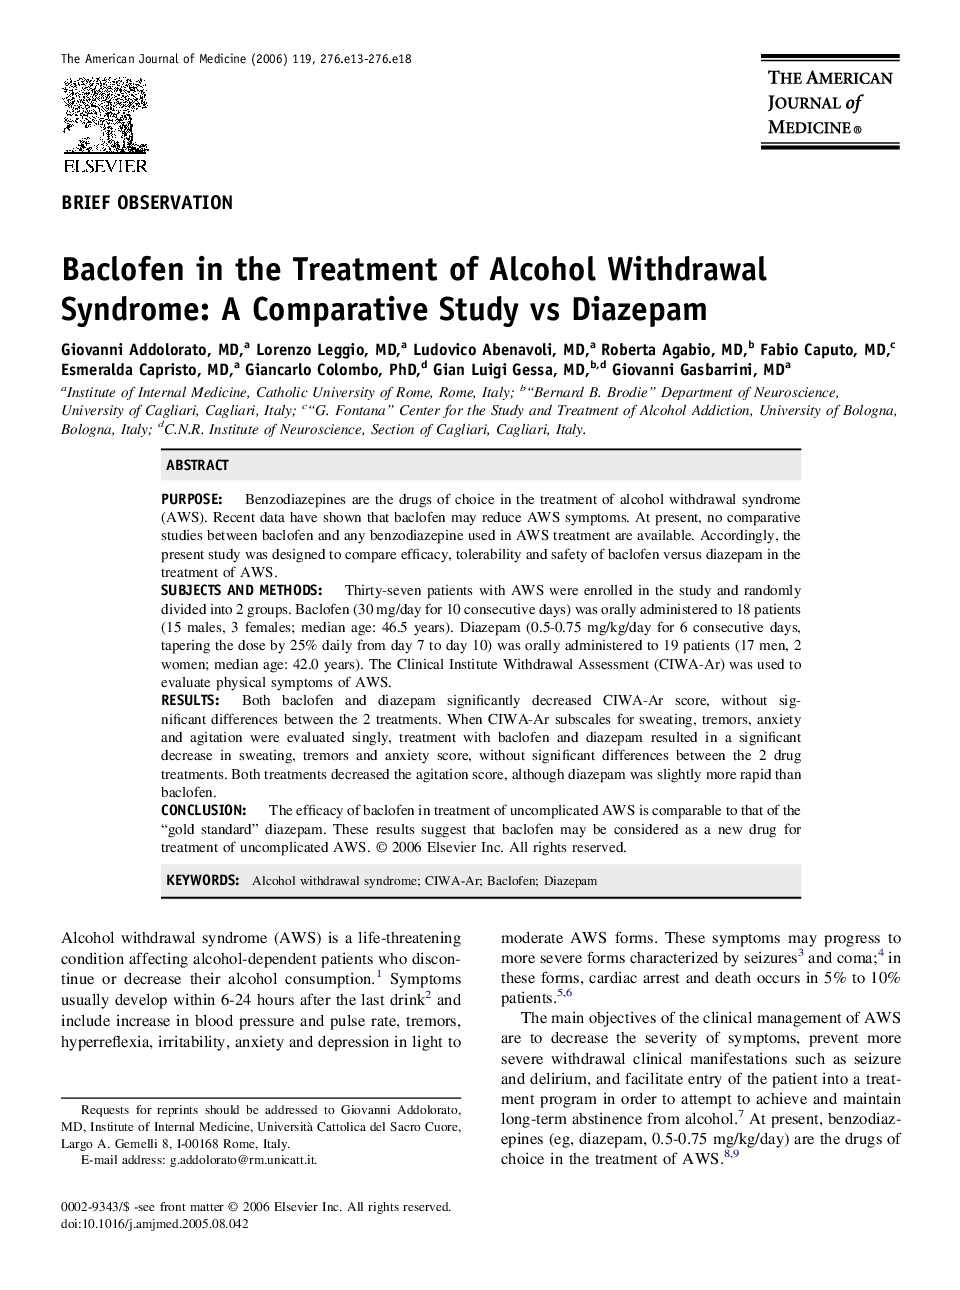 Baclofen in the Treatment of Alcohol Withdrawal Syndrome: A Comparative Study vs Diazepam